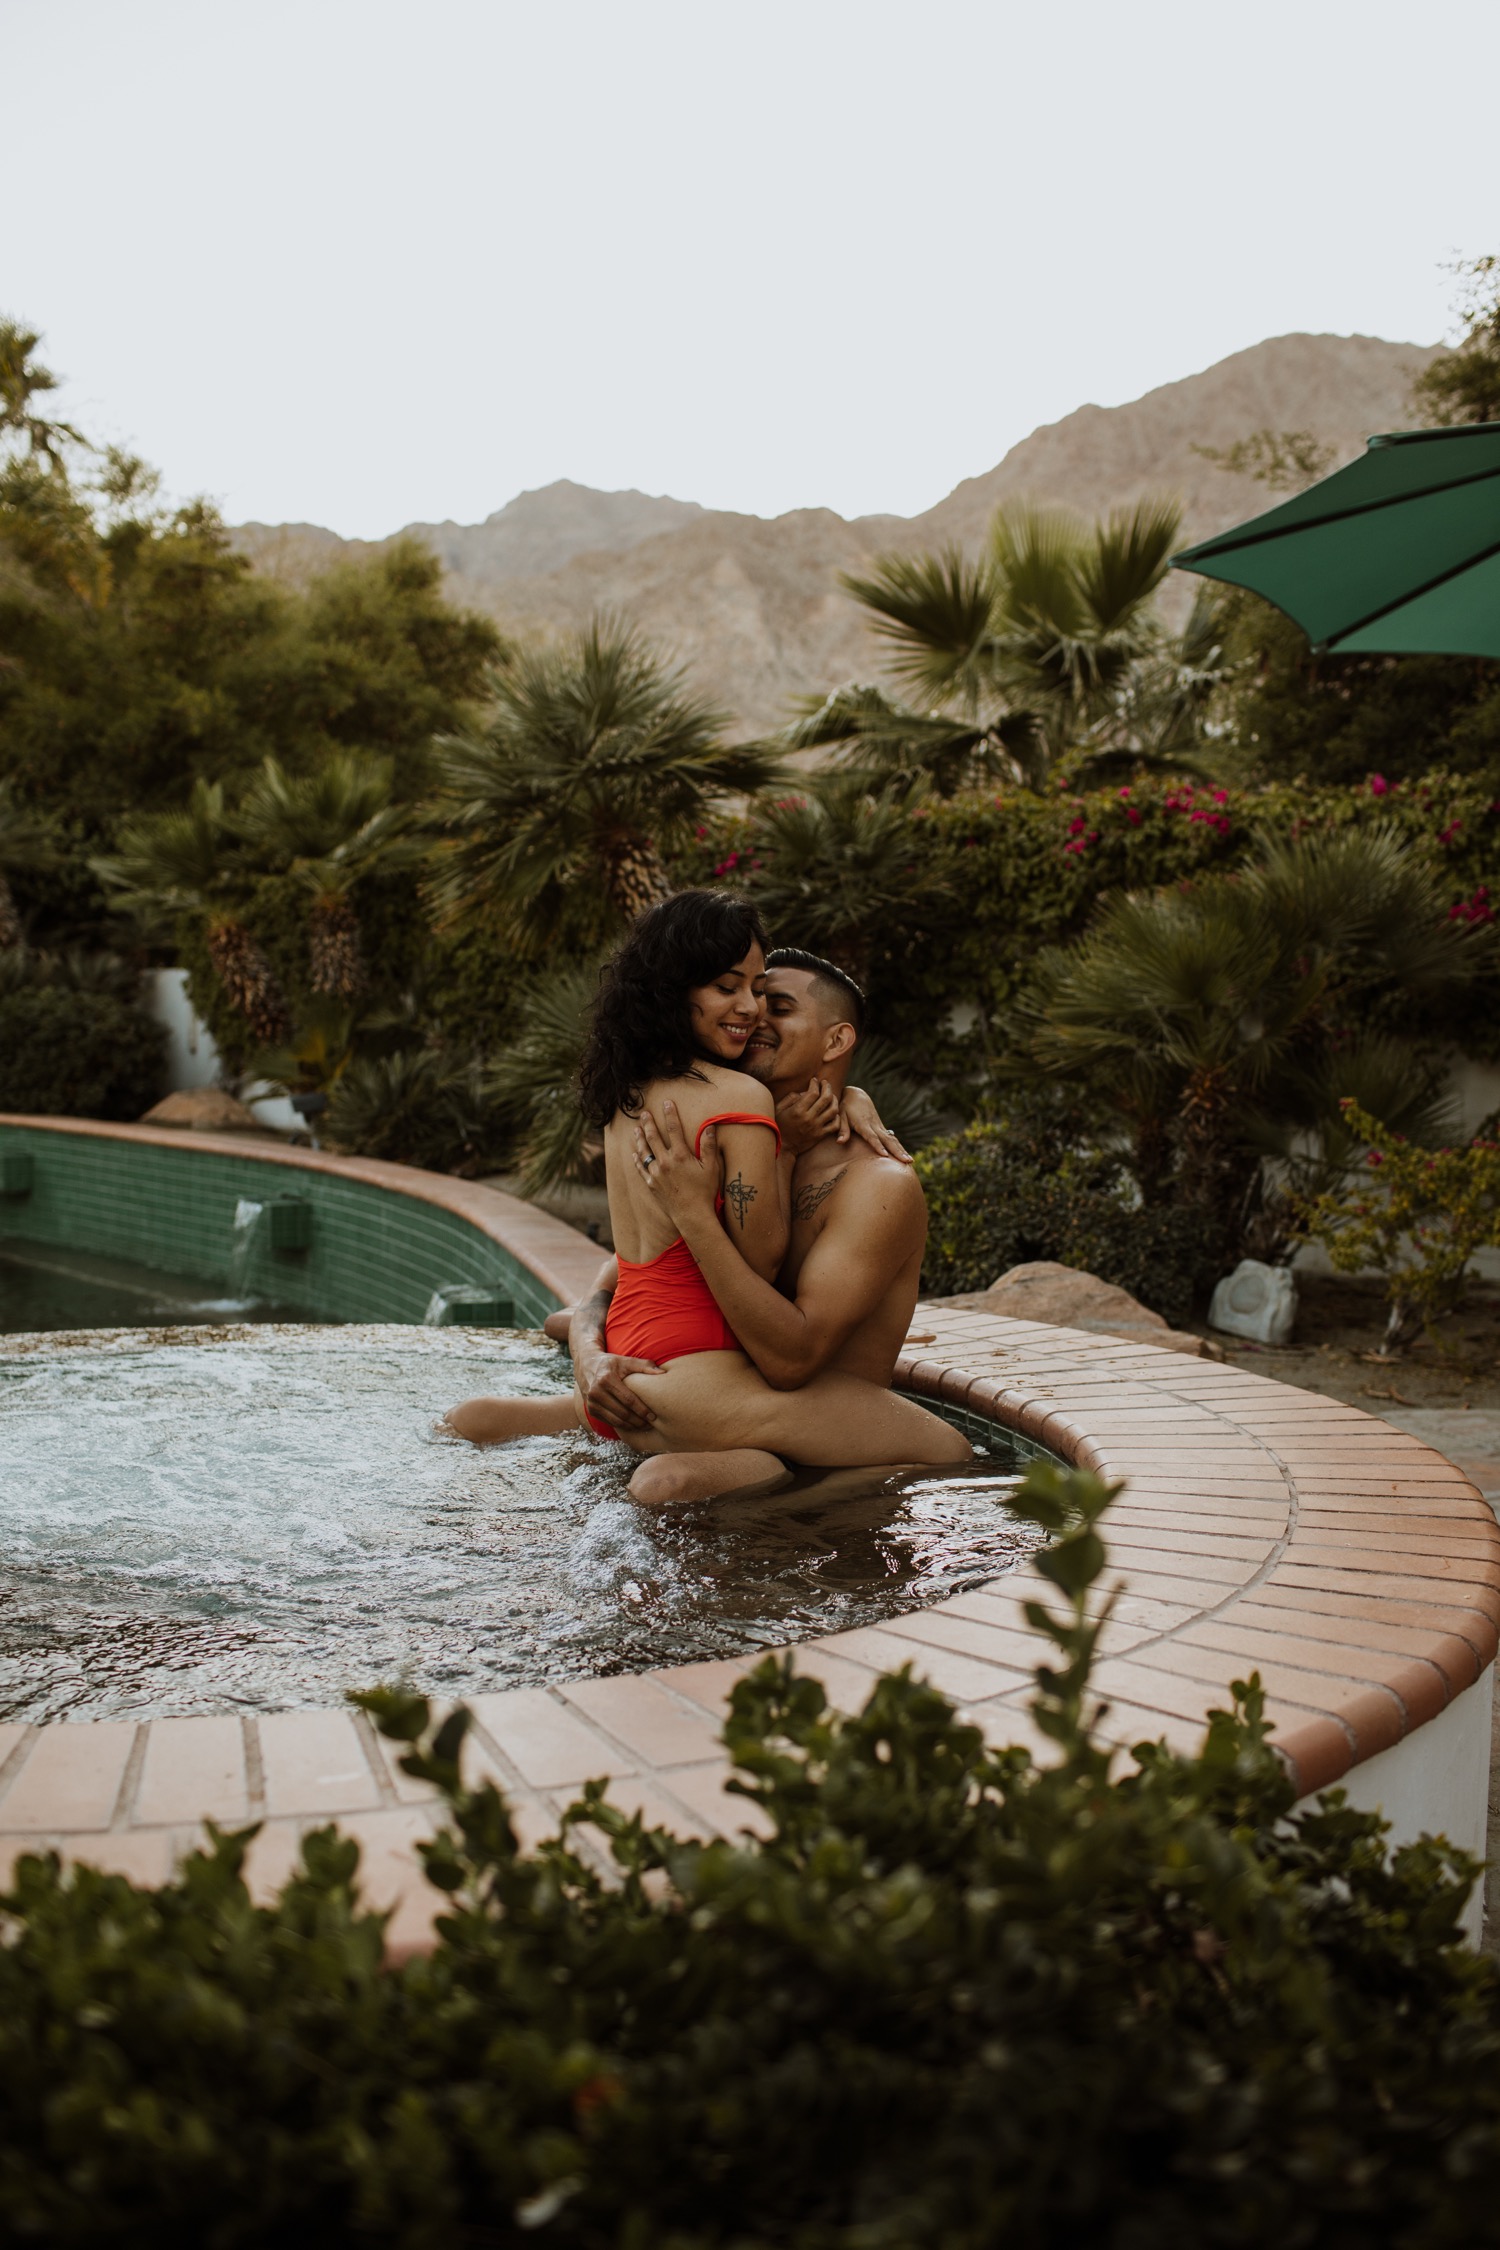 Couples Pose in the Pool | Poses, Photoshoot, Poses for pictures